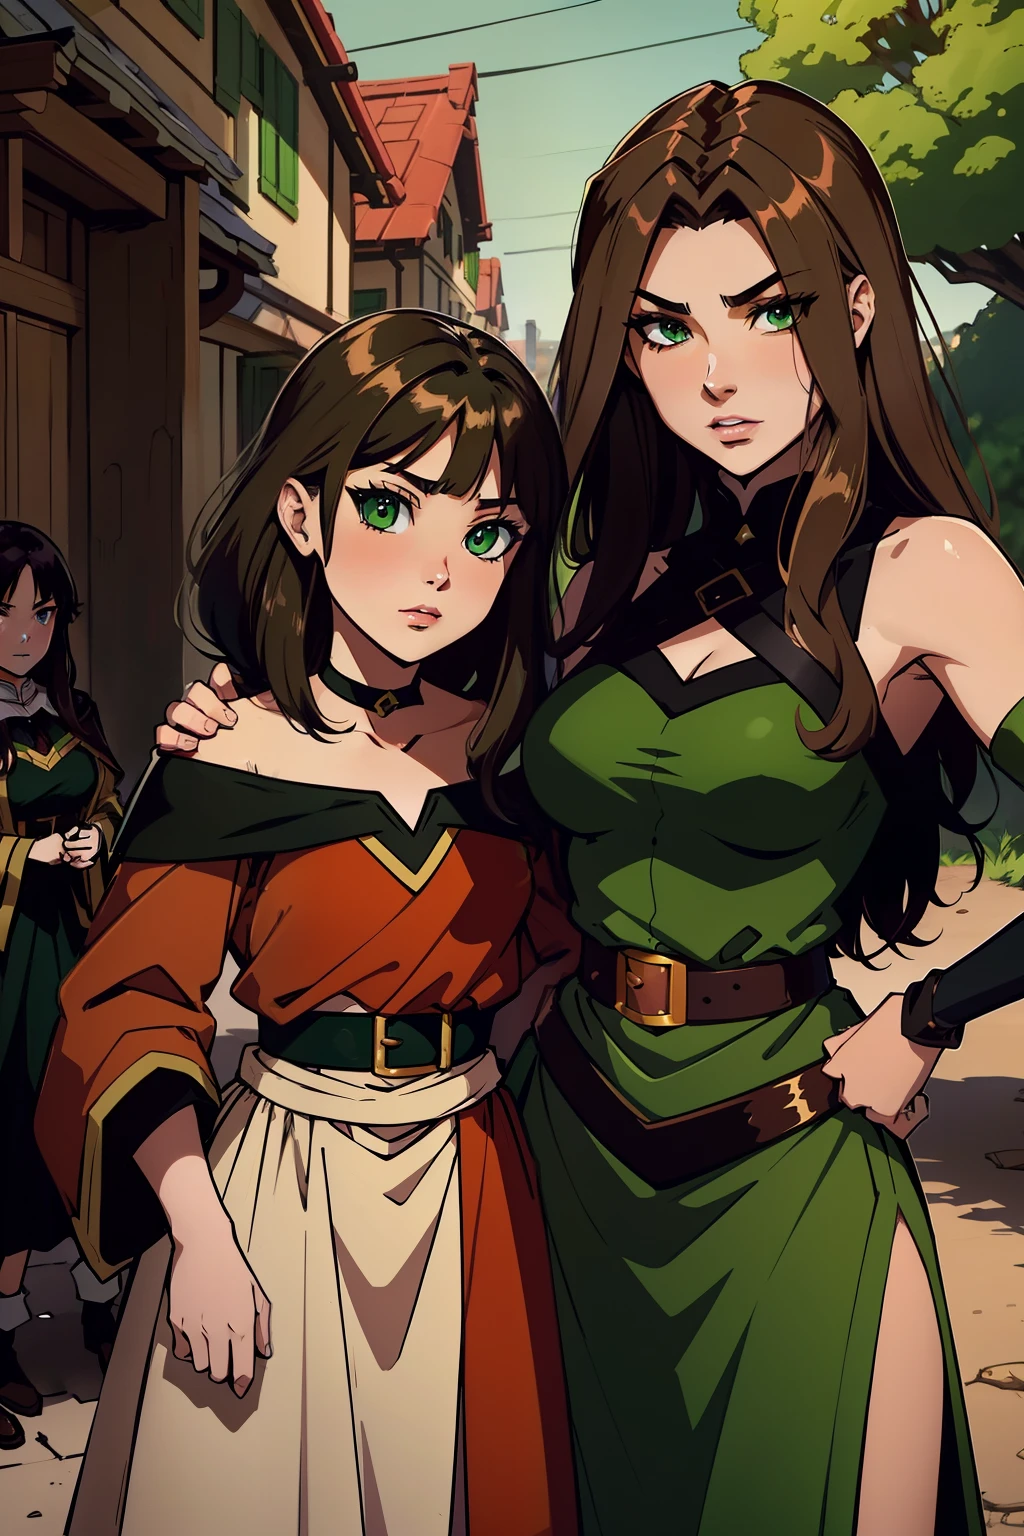 Megumin archimage (Have brunette color hair and dark green eyes) and her daughter 13 years old Esmeralda archmage's apprentice (Have brunette color hair and dark green eyes, fight against enemy